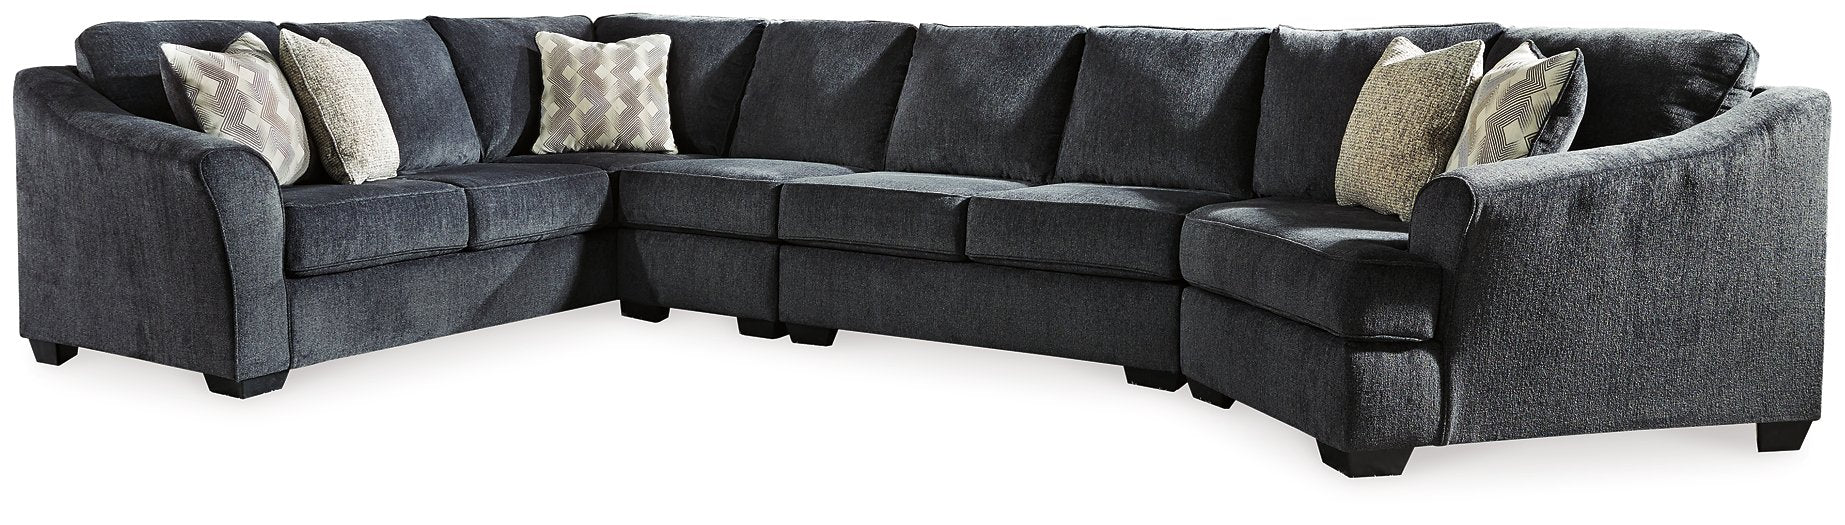 Eltmann 4-Piece Sectional with Cuddler image